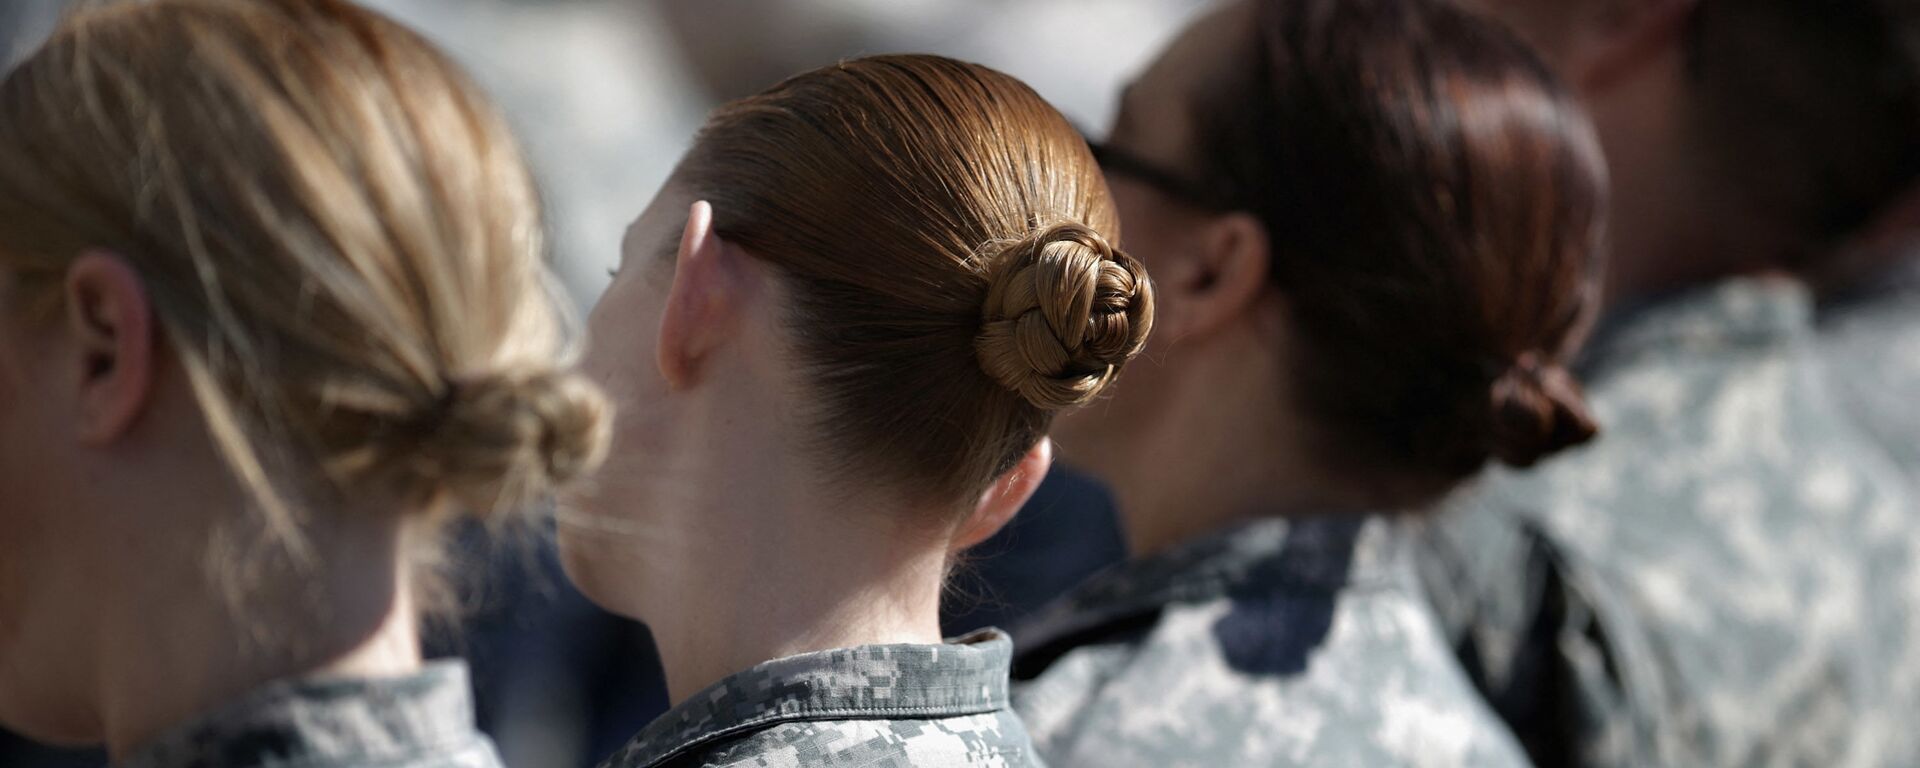 ARLINGTON, VA - MARCH 31: Soldiers, officers and civilian employees attend the commencement ceremony for the U.S. Army's annual observance of Sexual Assault Awareness and Prevention Month in the Pentagon Center Courtyard March 31, 2015 in Arlington, Virginia. In conjunction with the national campaign against sexual assault, The Army announced this year's theme, 'Not in My Squad. Not in Our Army. We are Trusted Professionals,' during the ceremony.К According to the Pentagon, the initative 'is a grassroots approach meant to reinforce a climate of dignity and respect founded on good order and discipline.'  - Sputnik International, 1920, 08.05.2021